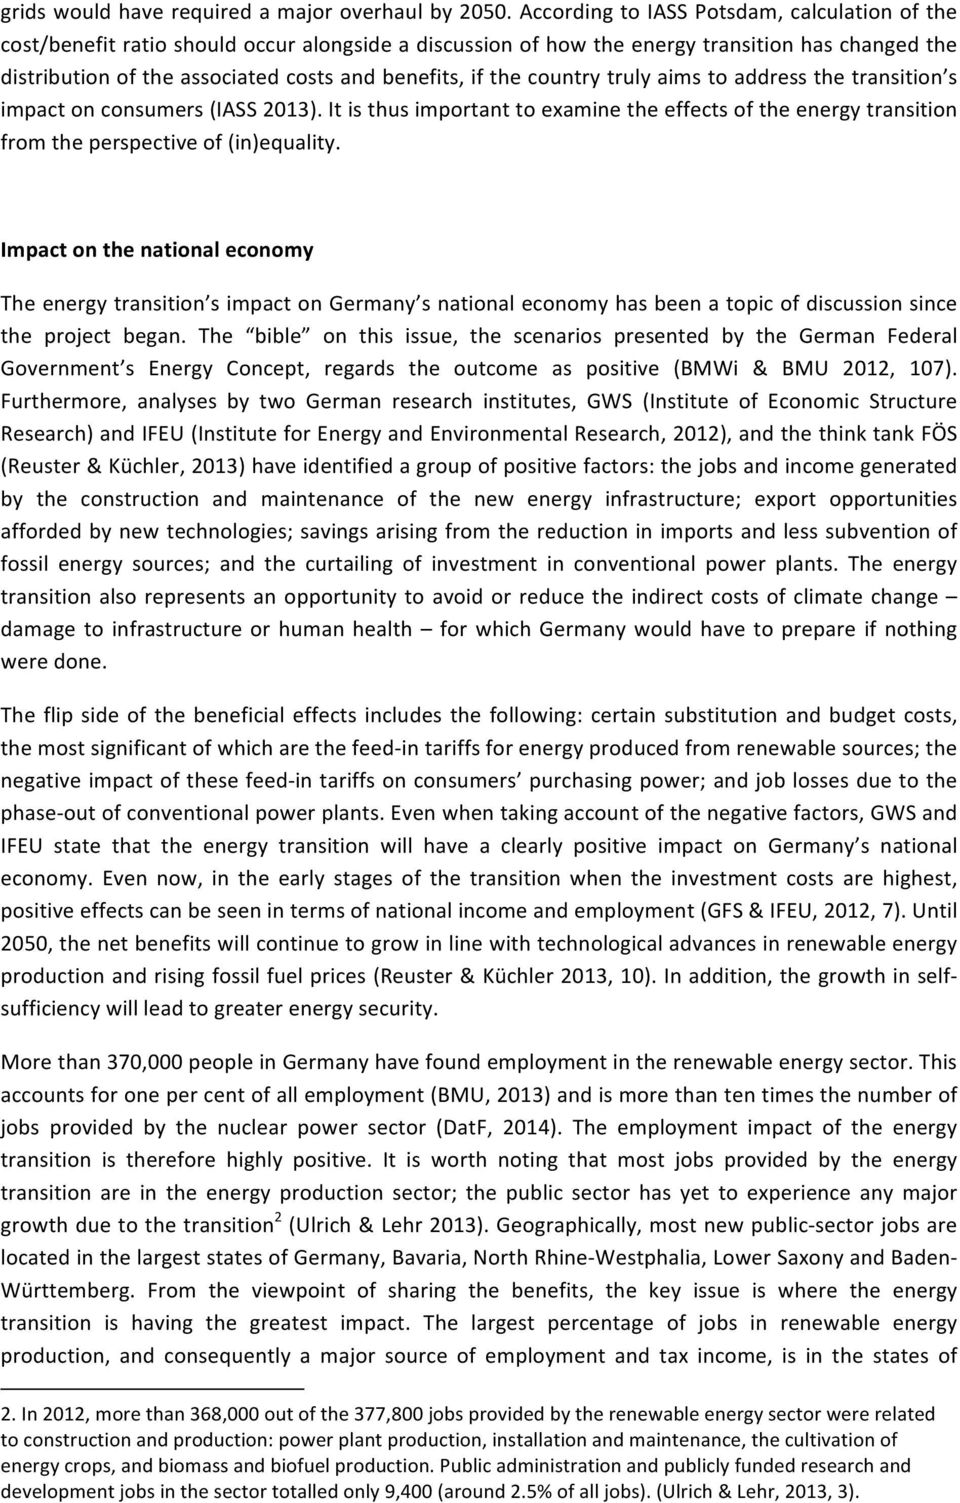 the country truly aims to address the transition s impact on consumers (IASS 2013). It is thus important to examine the effects of the energy transition from the perspective of (in)equality.